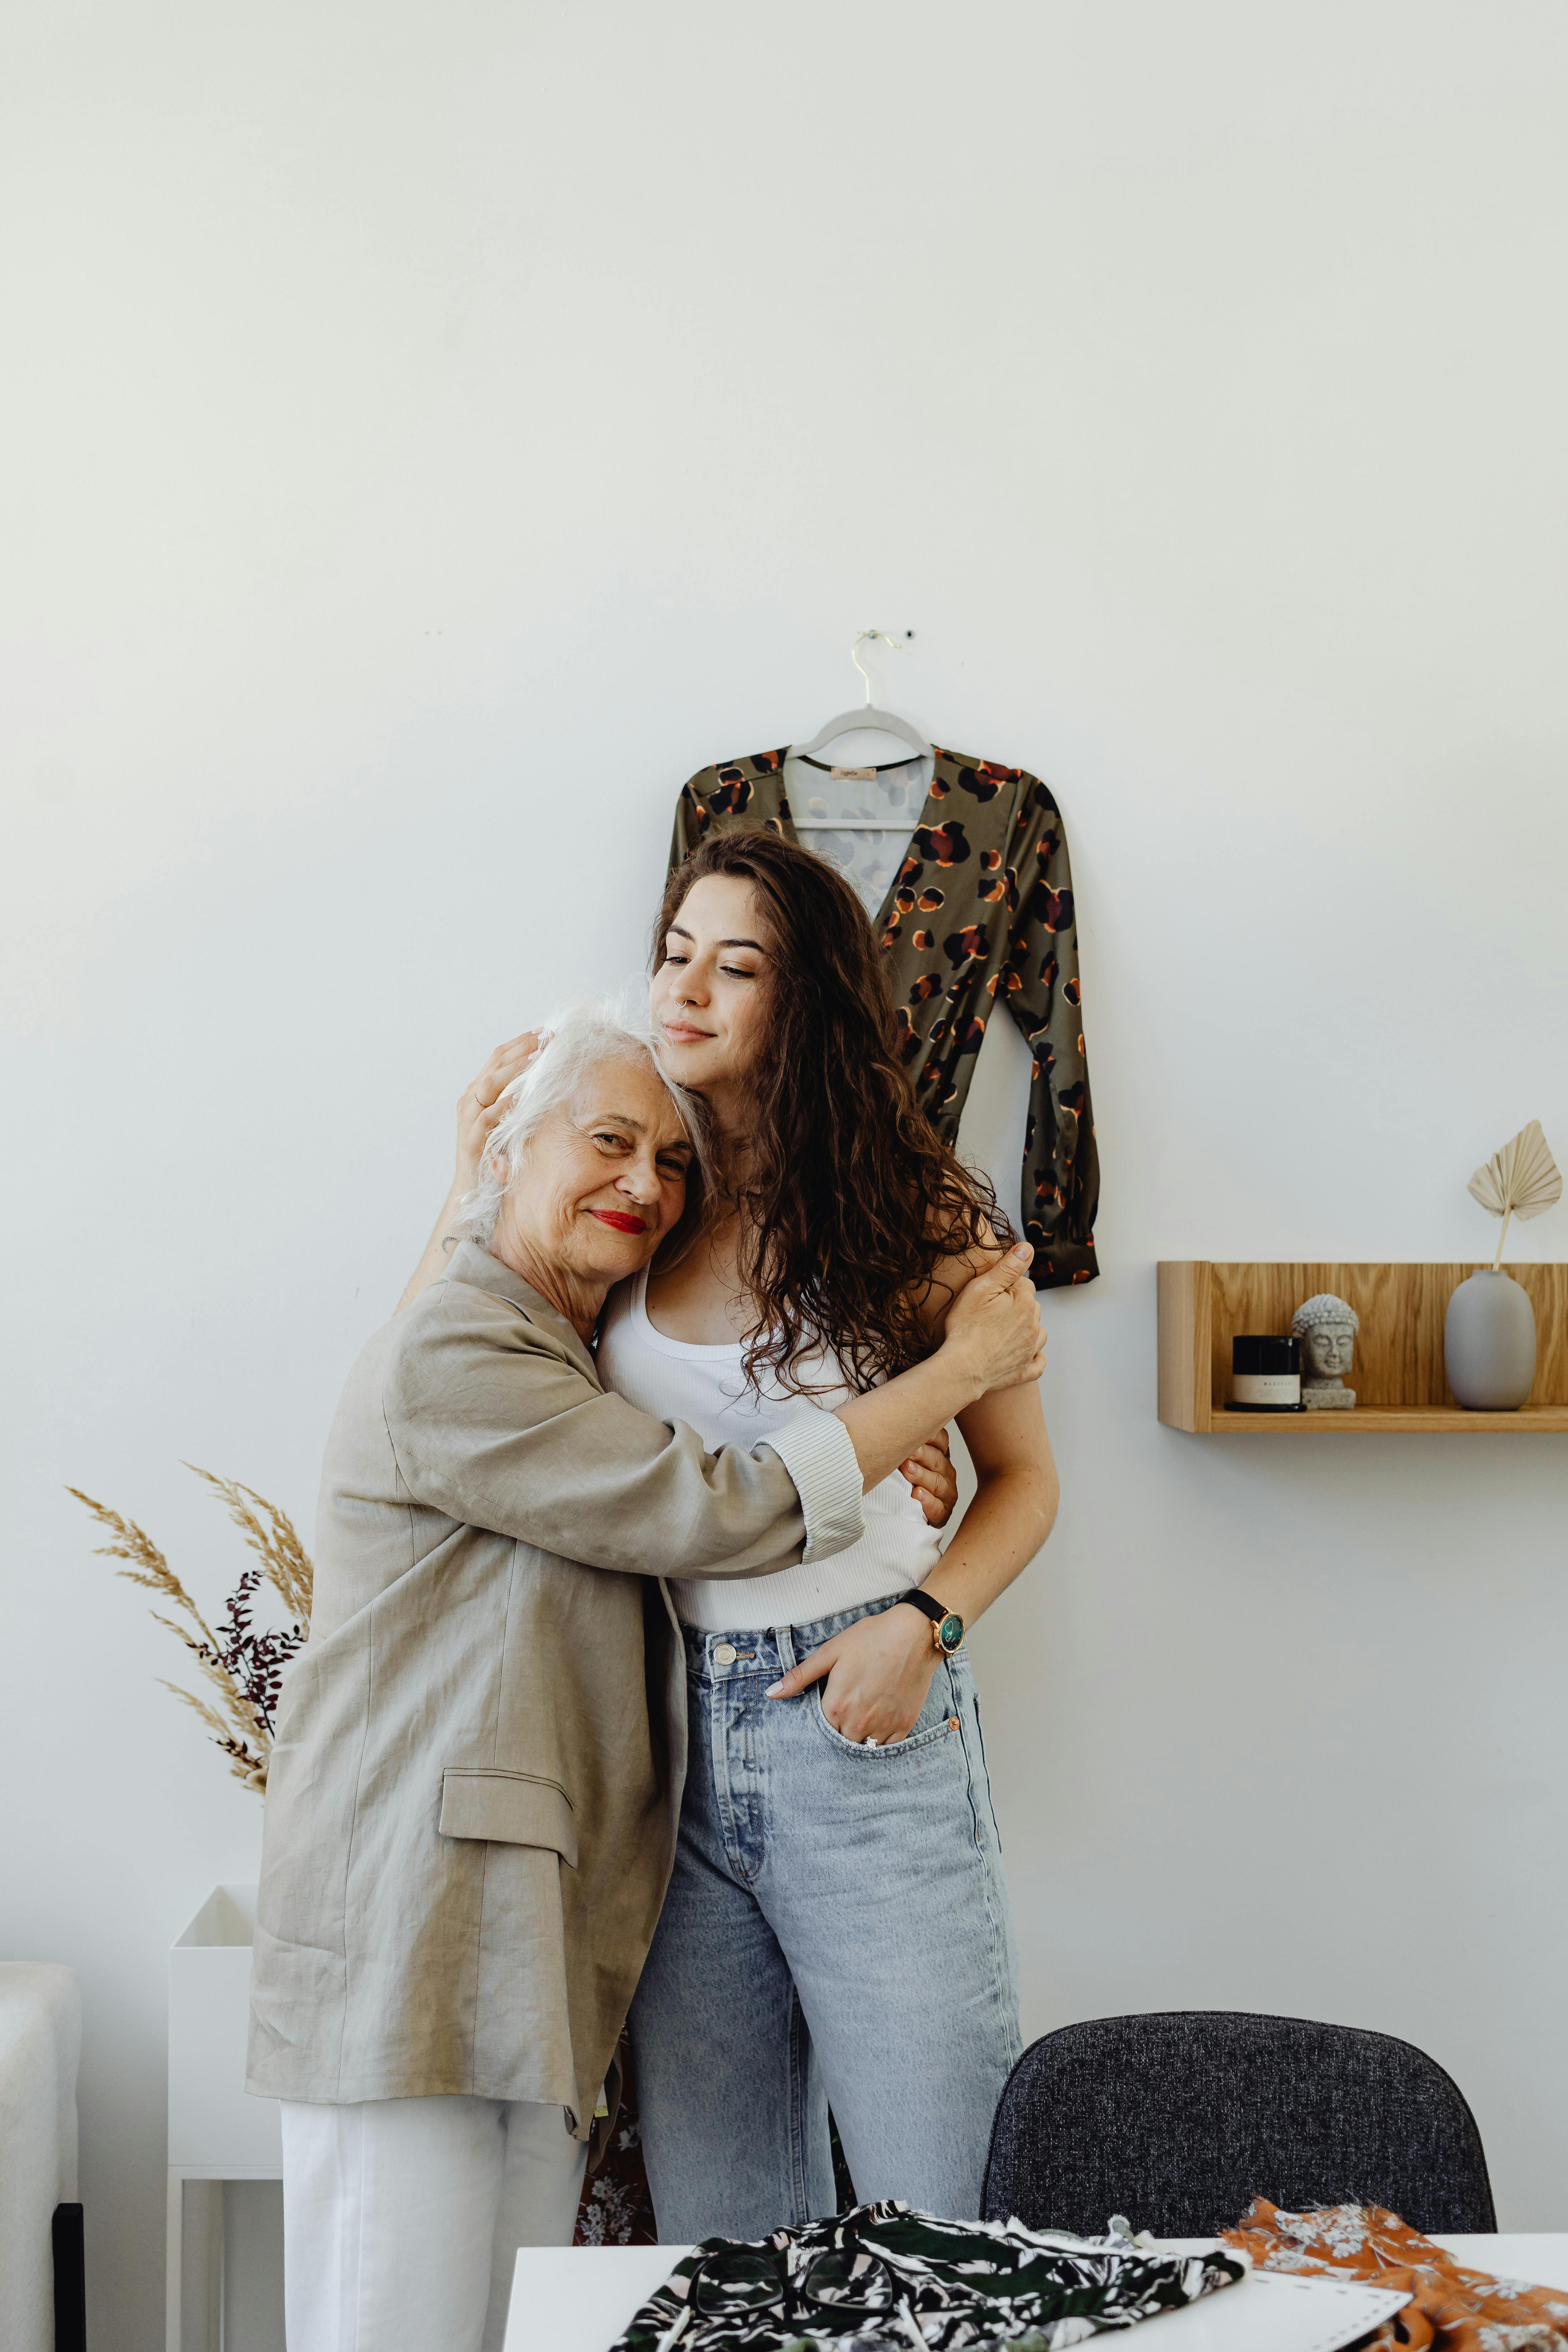 An upset-looking younger woman hugging an older one | Source: Pexels